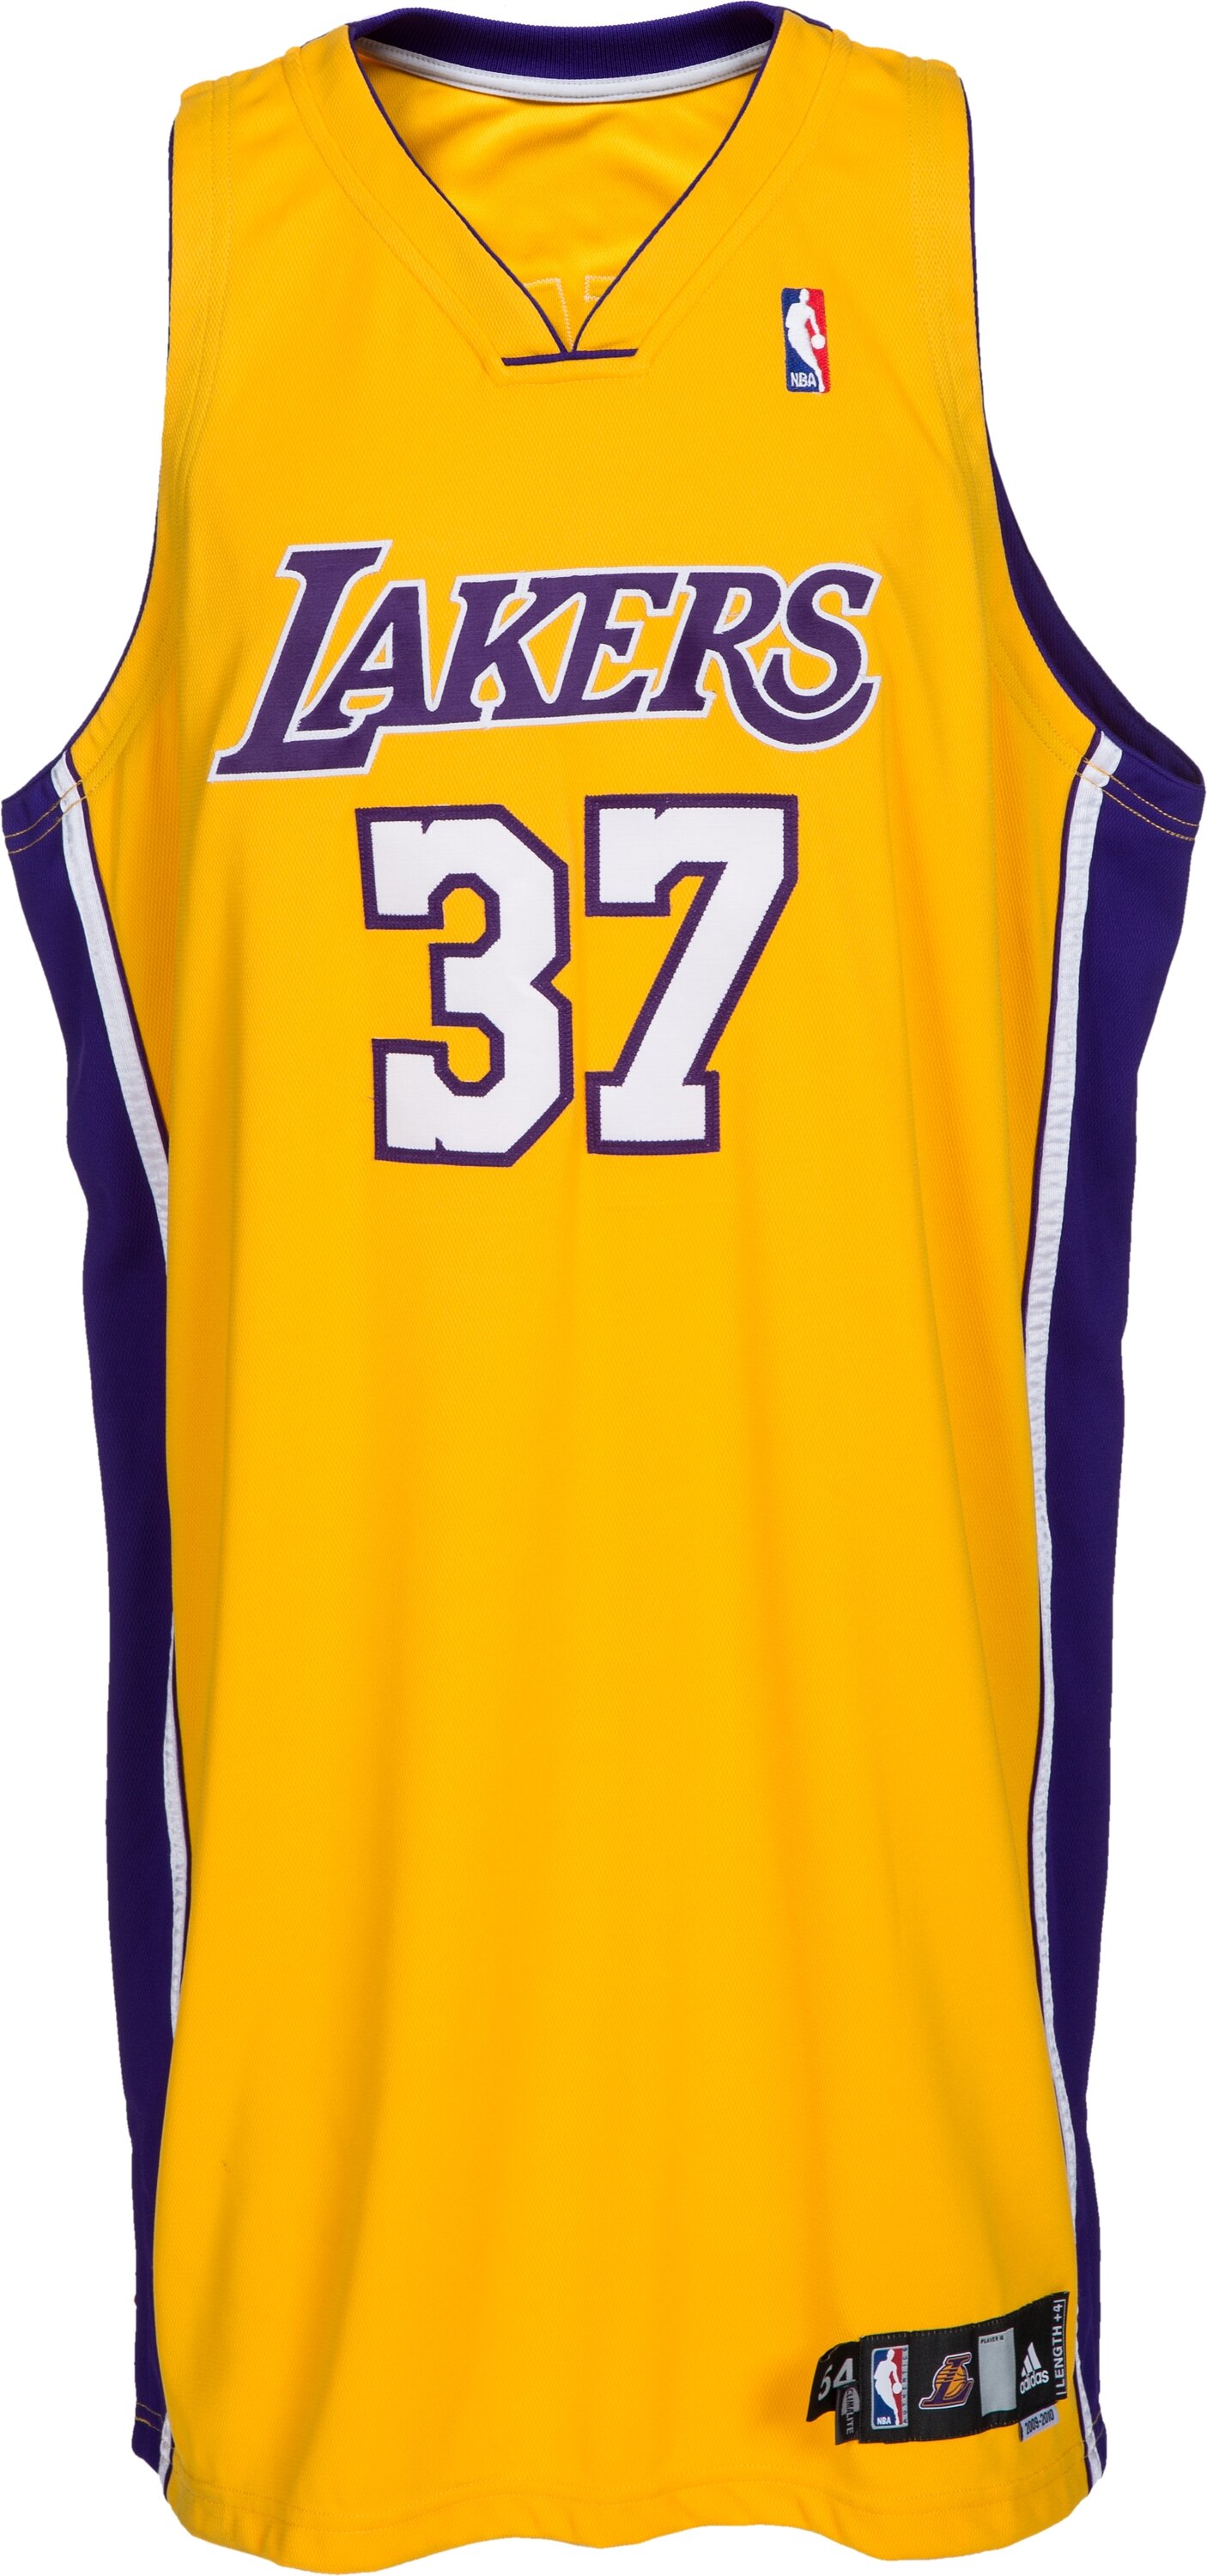 Ron Artest Jersey for sale